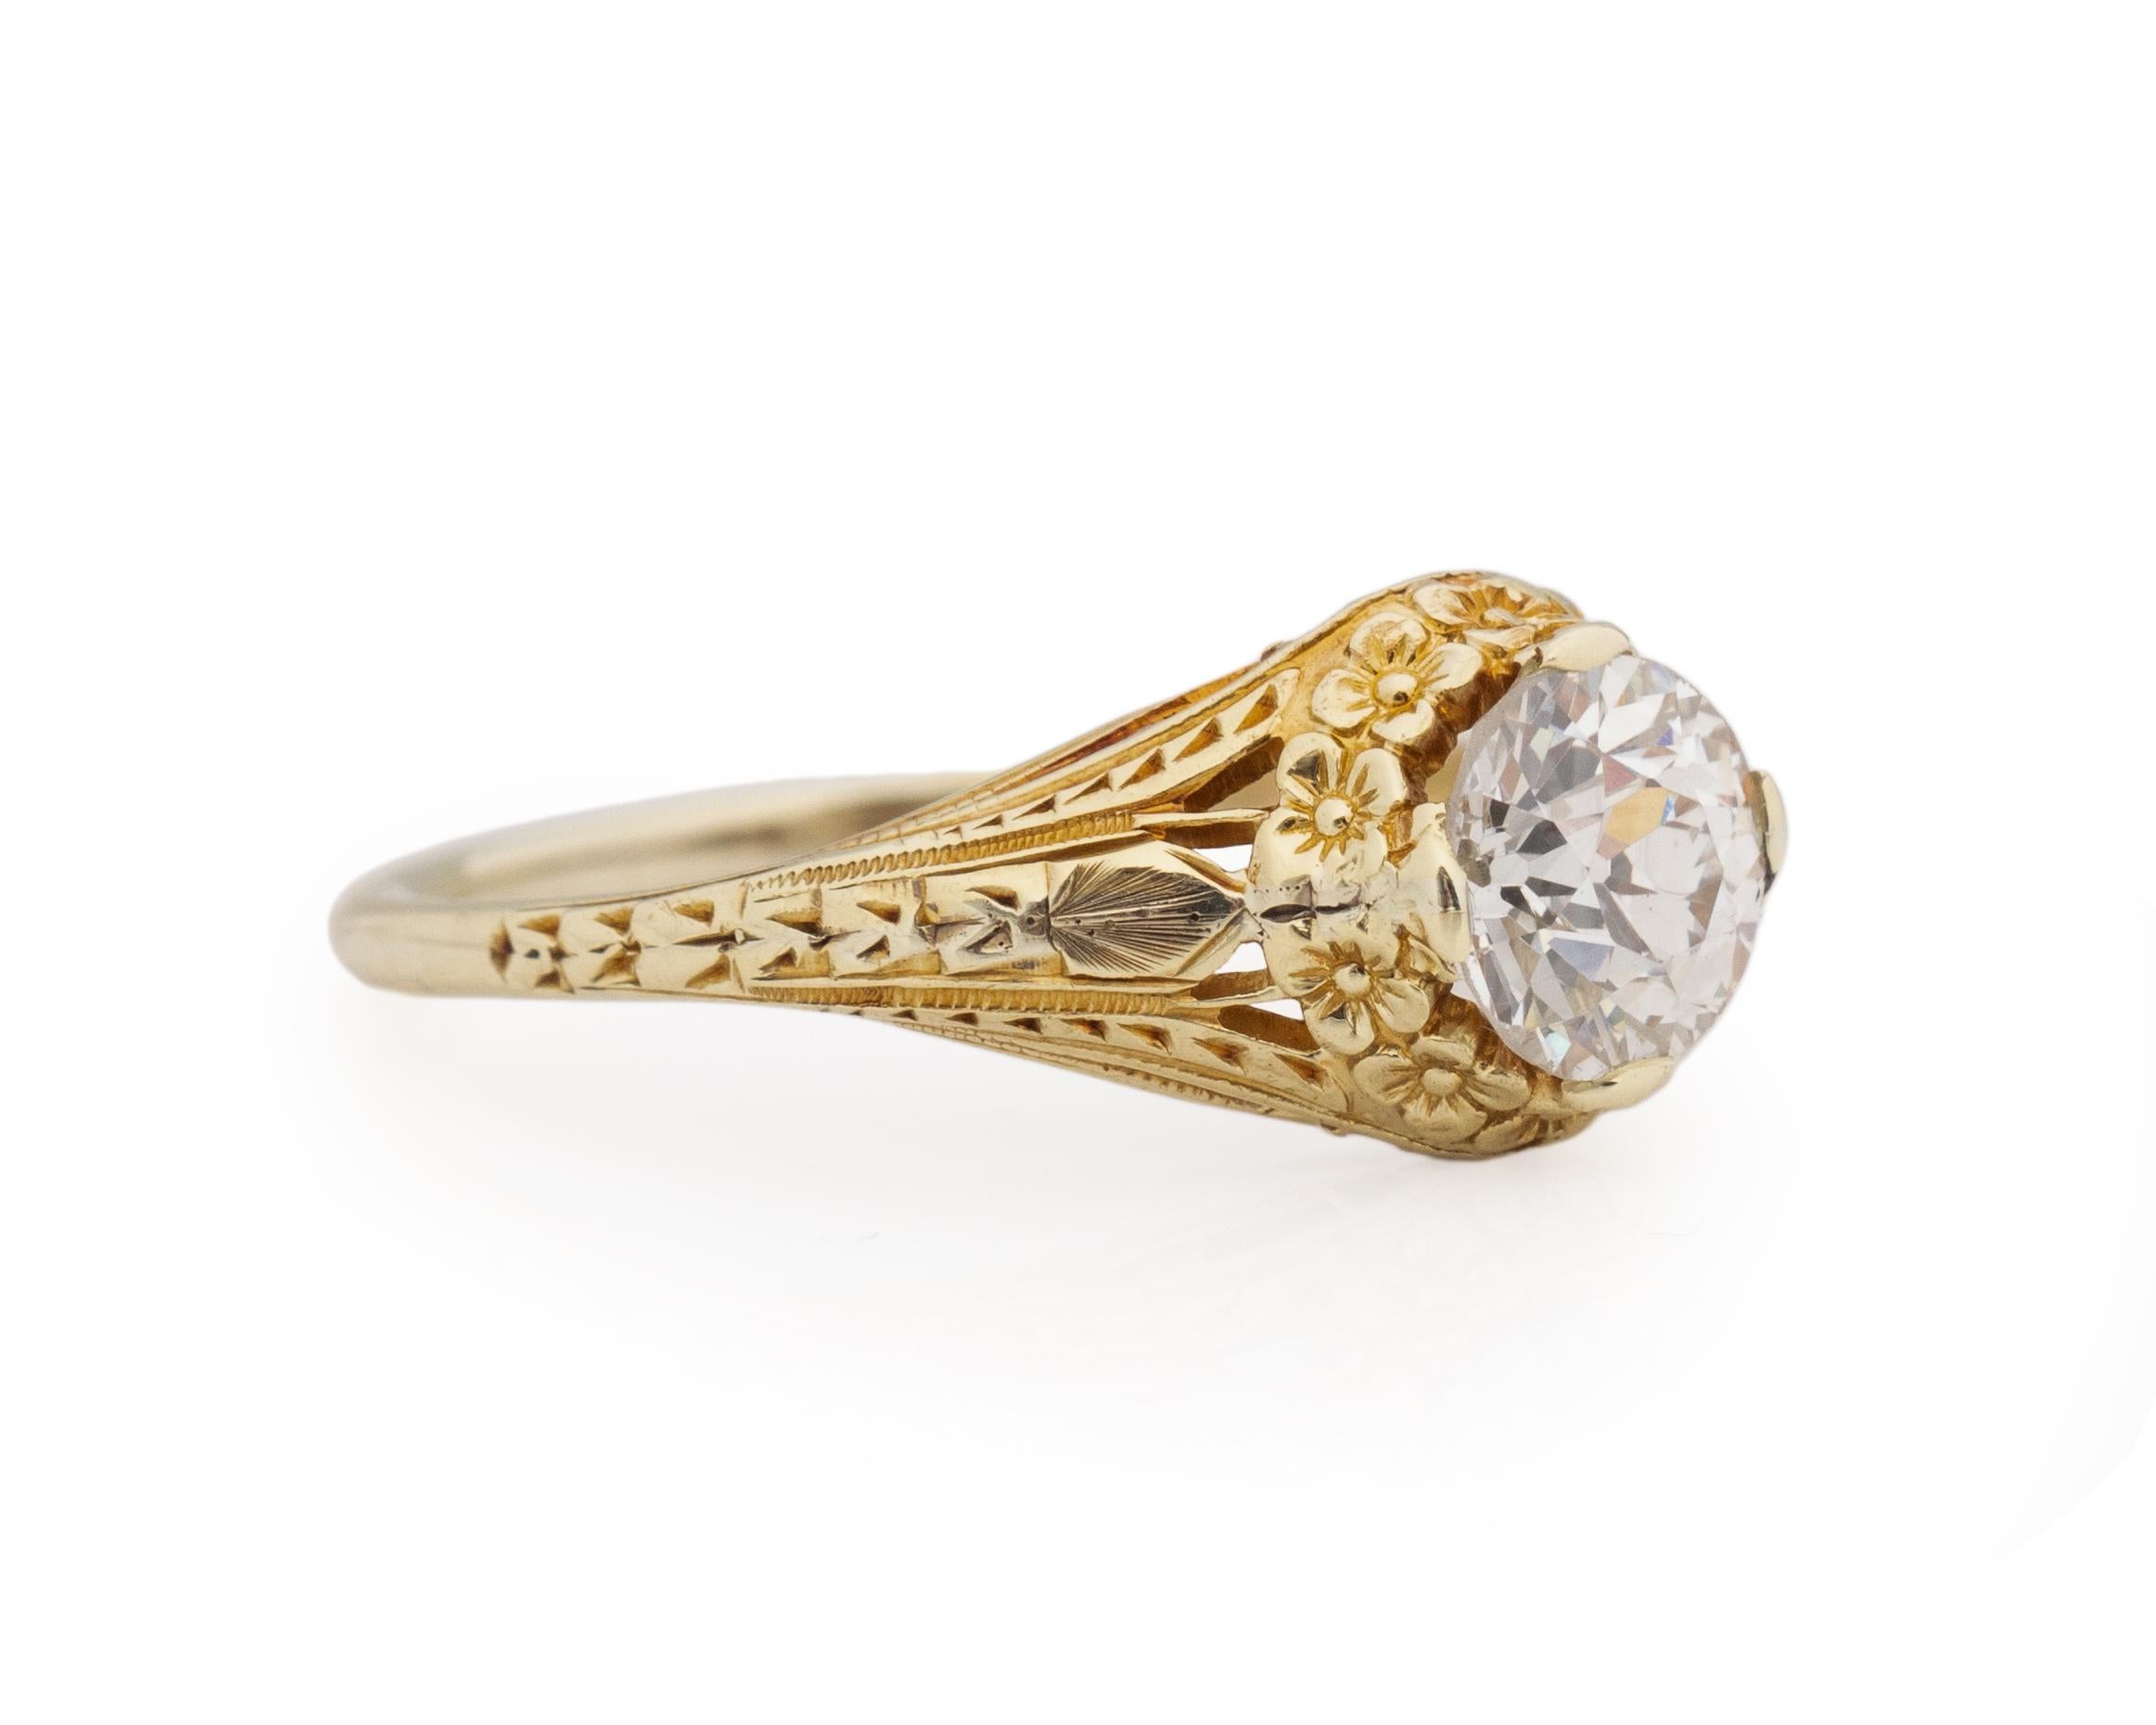 Ring Size: 5.75
Metal Type: 14K Yellow Gold [Hallmarked, and Tested]
Weight: 2.8 grams

Diamond Details:
GIA REPORT #:6227447949
Weight: .98ct
Cut: Old European brilliant
Color: K
Clarity: SI2
Measurements: 6.19mm x 6.00mm x 4.26mm

Finger to Top of